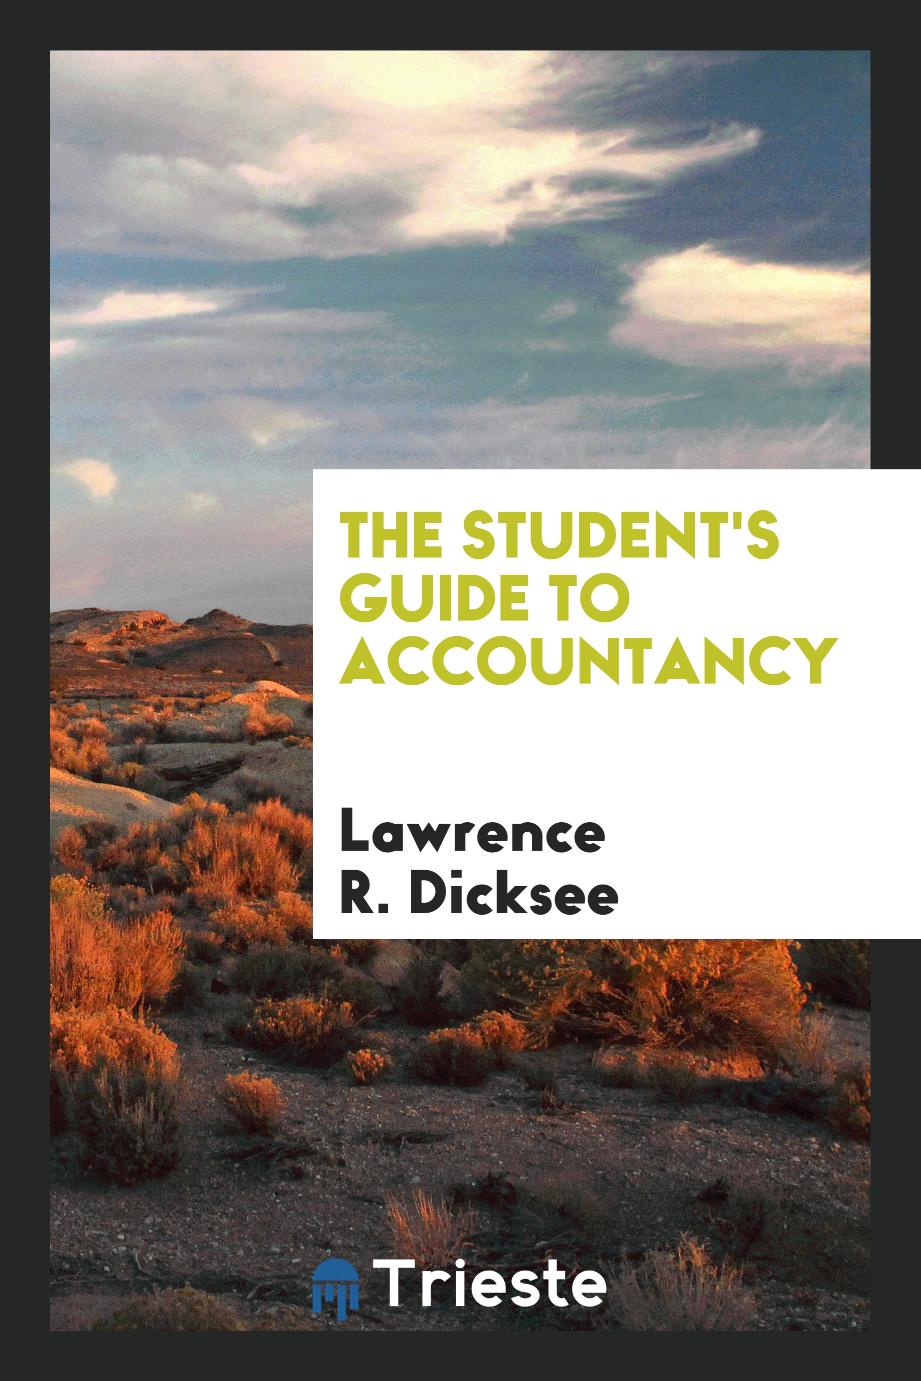 The Student's Guide to Accountancy